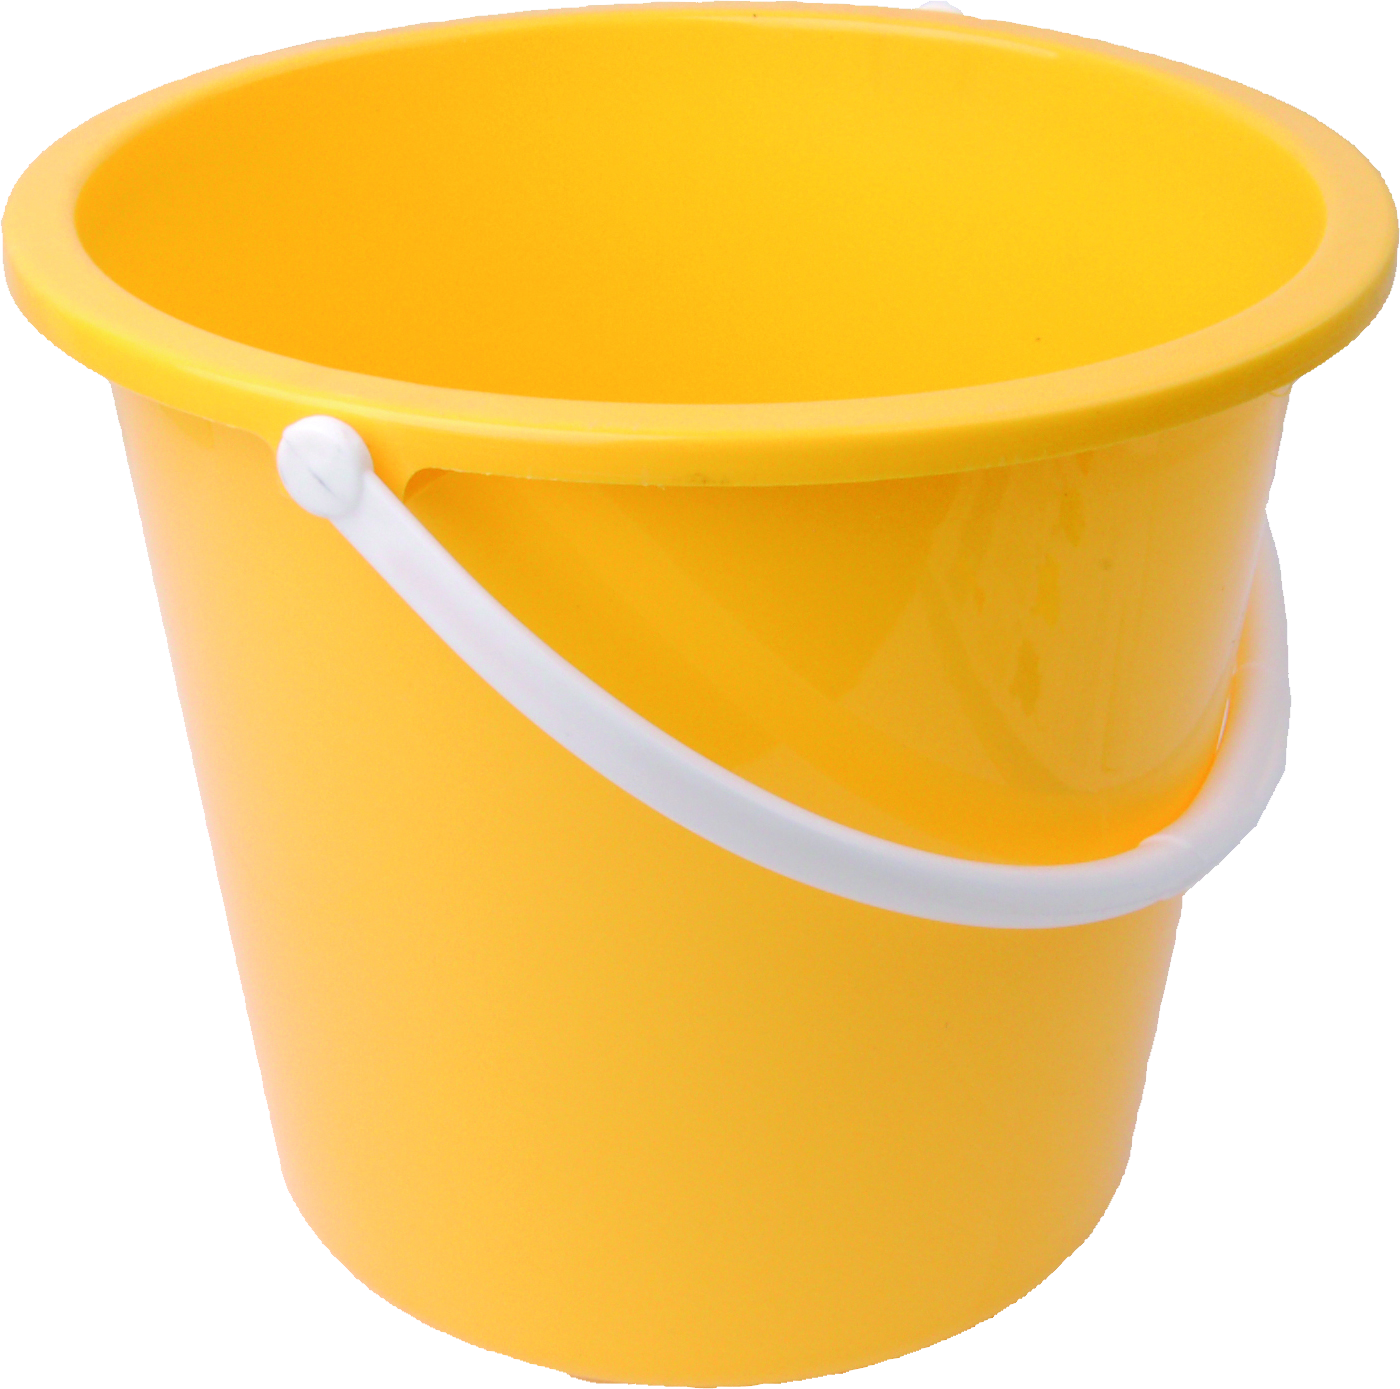 Plastic yellow bucket PNG image free download